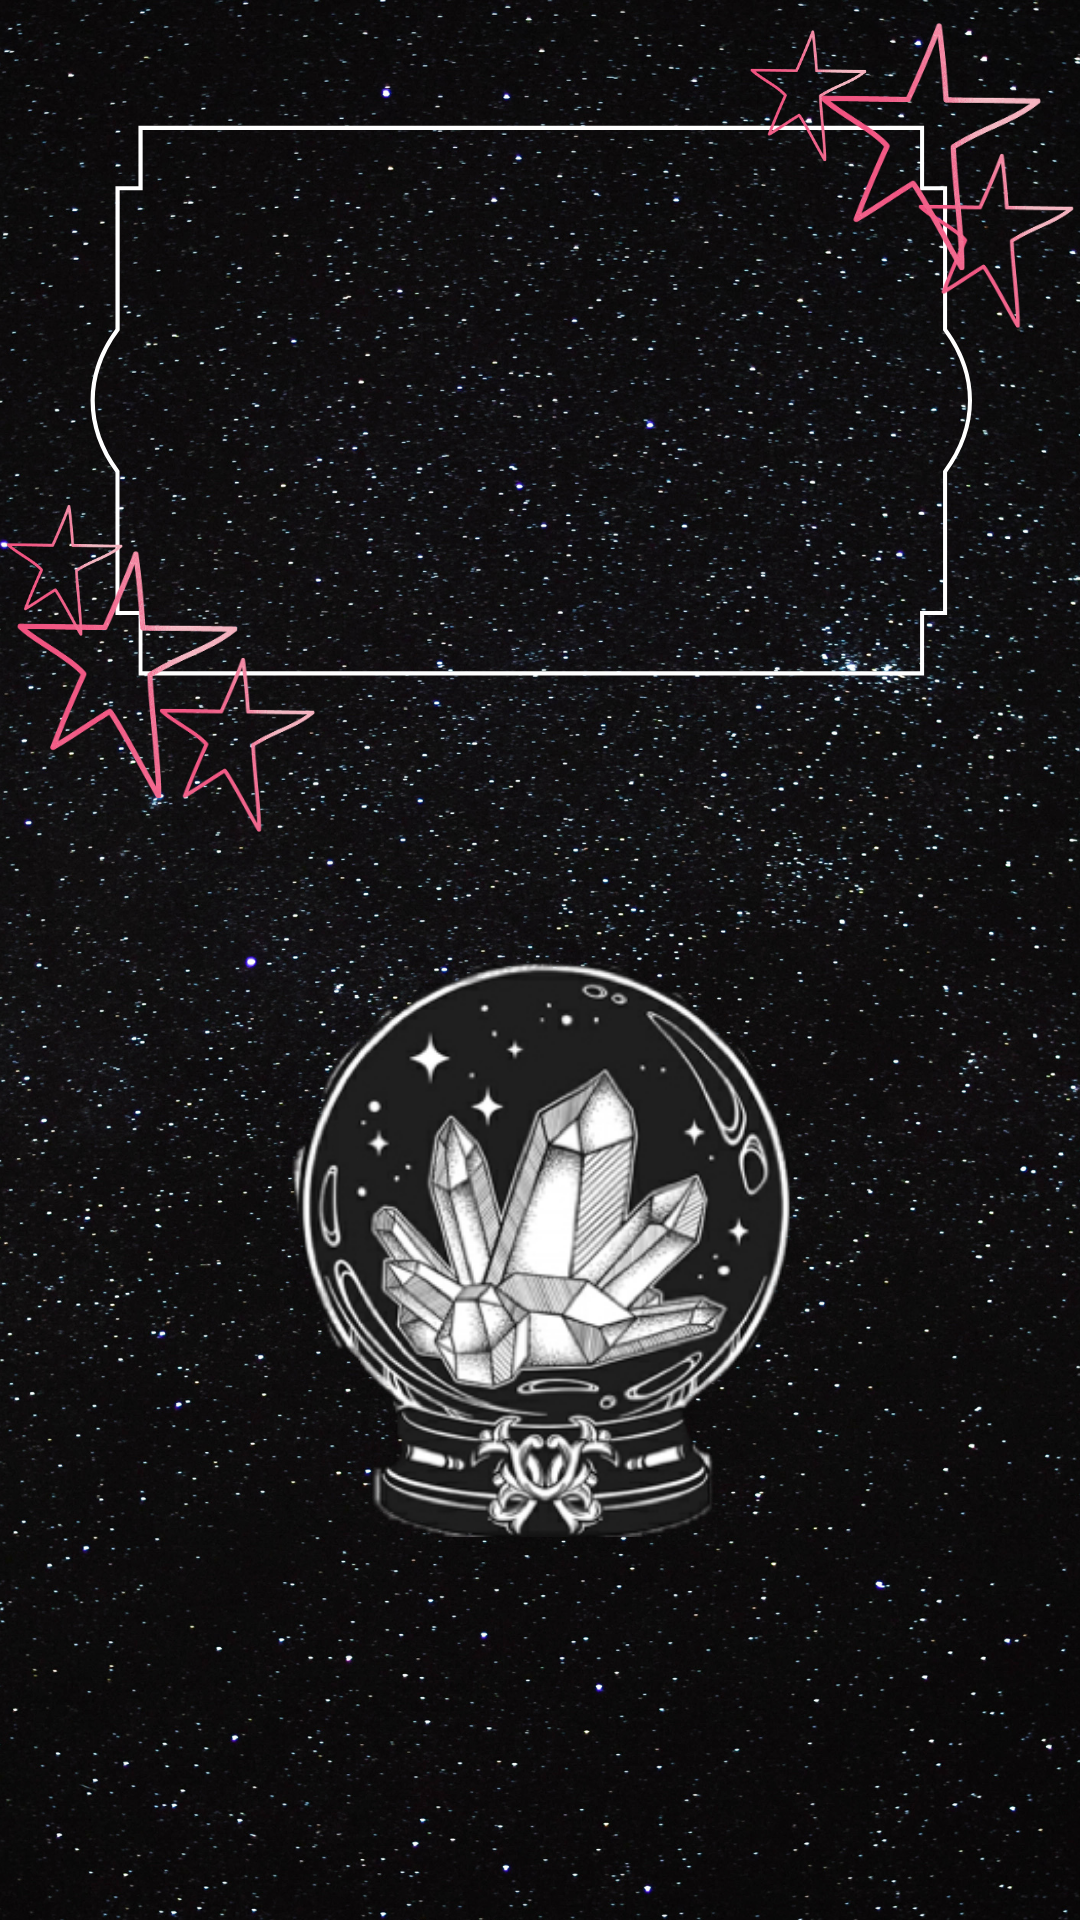 Crystal Ball IPhone wallpaper. Witchy wallpaper, Witch wallpaper, iPhone background wallpaper